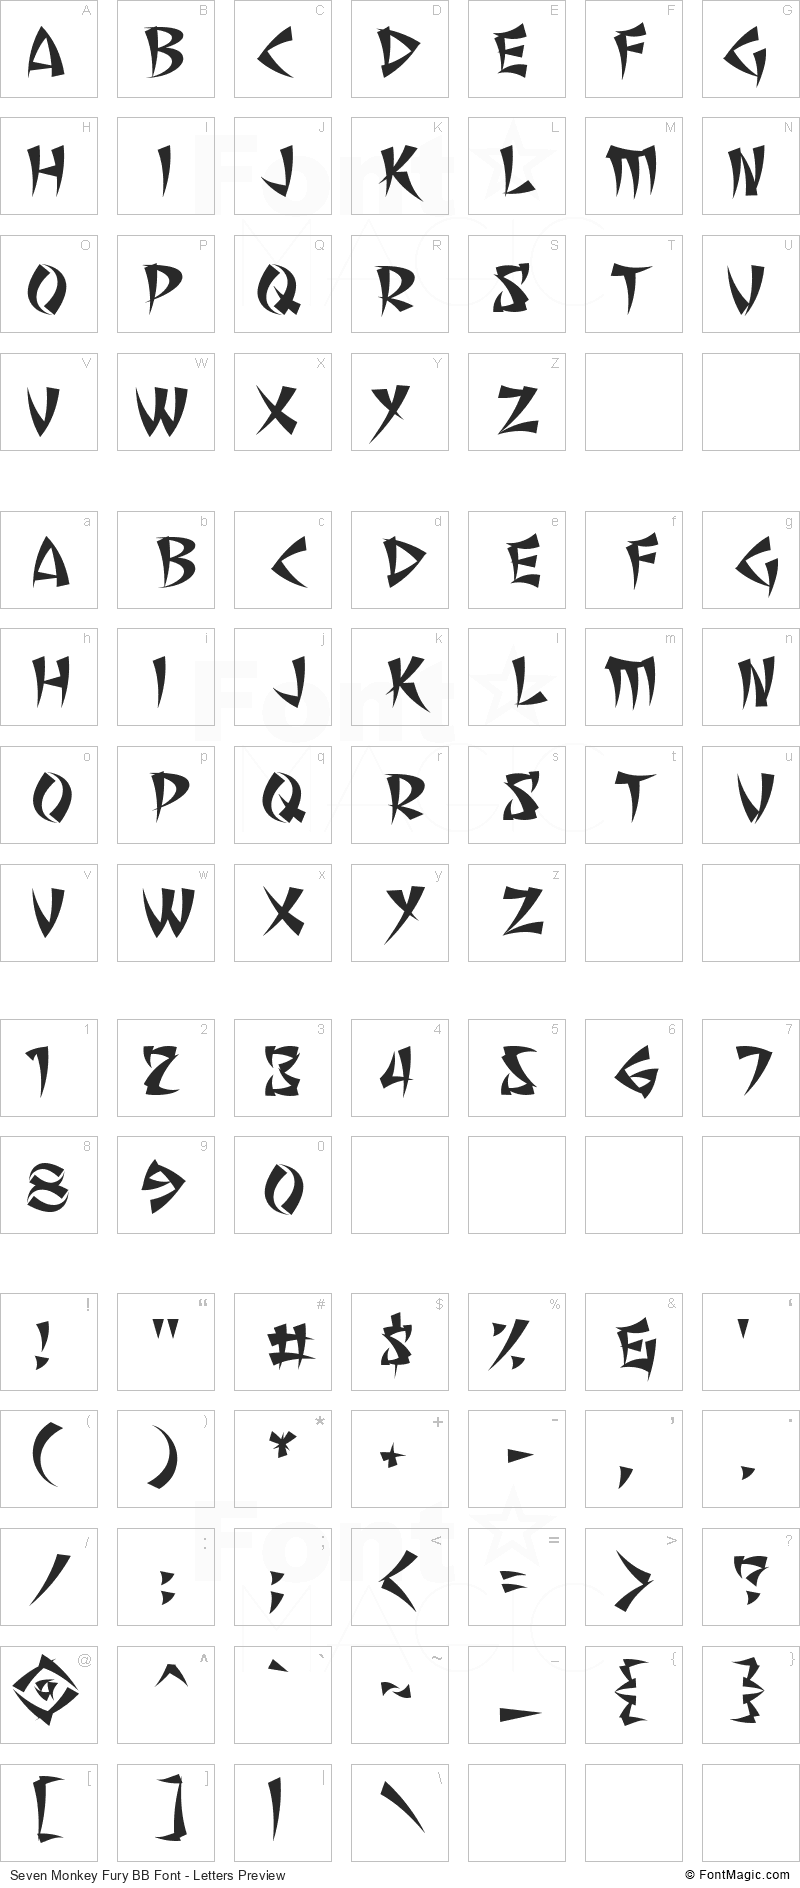 Seven Monkey Fury BB Font - All Latters Preview Chart